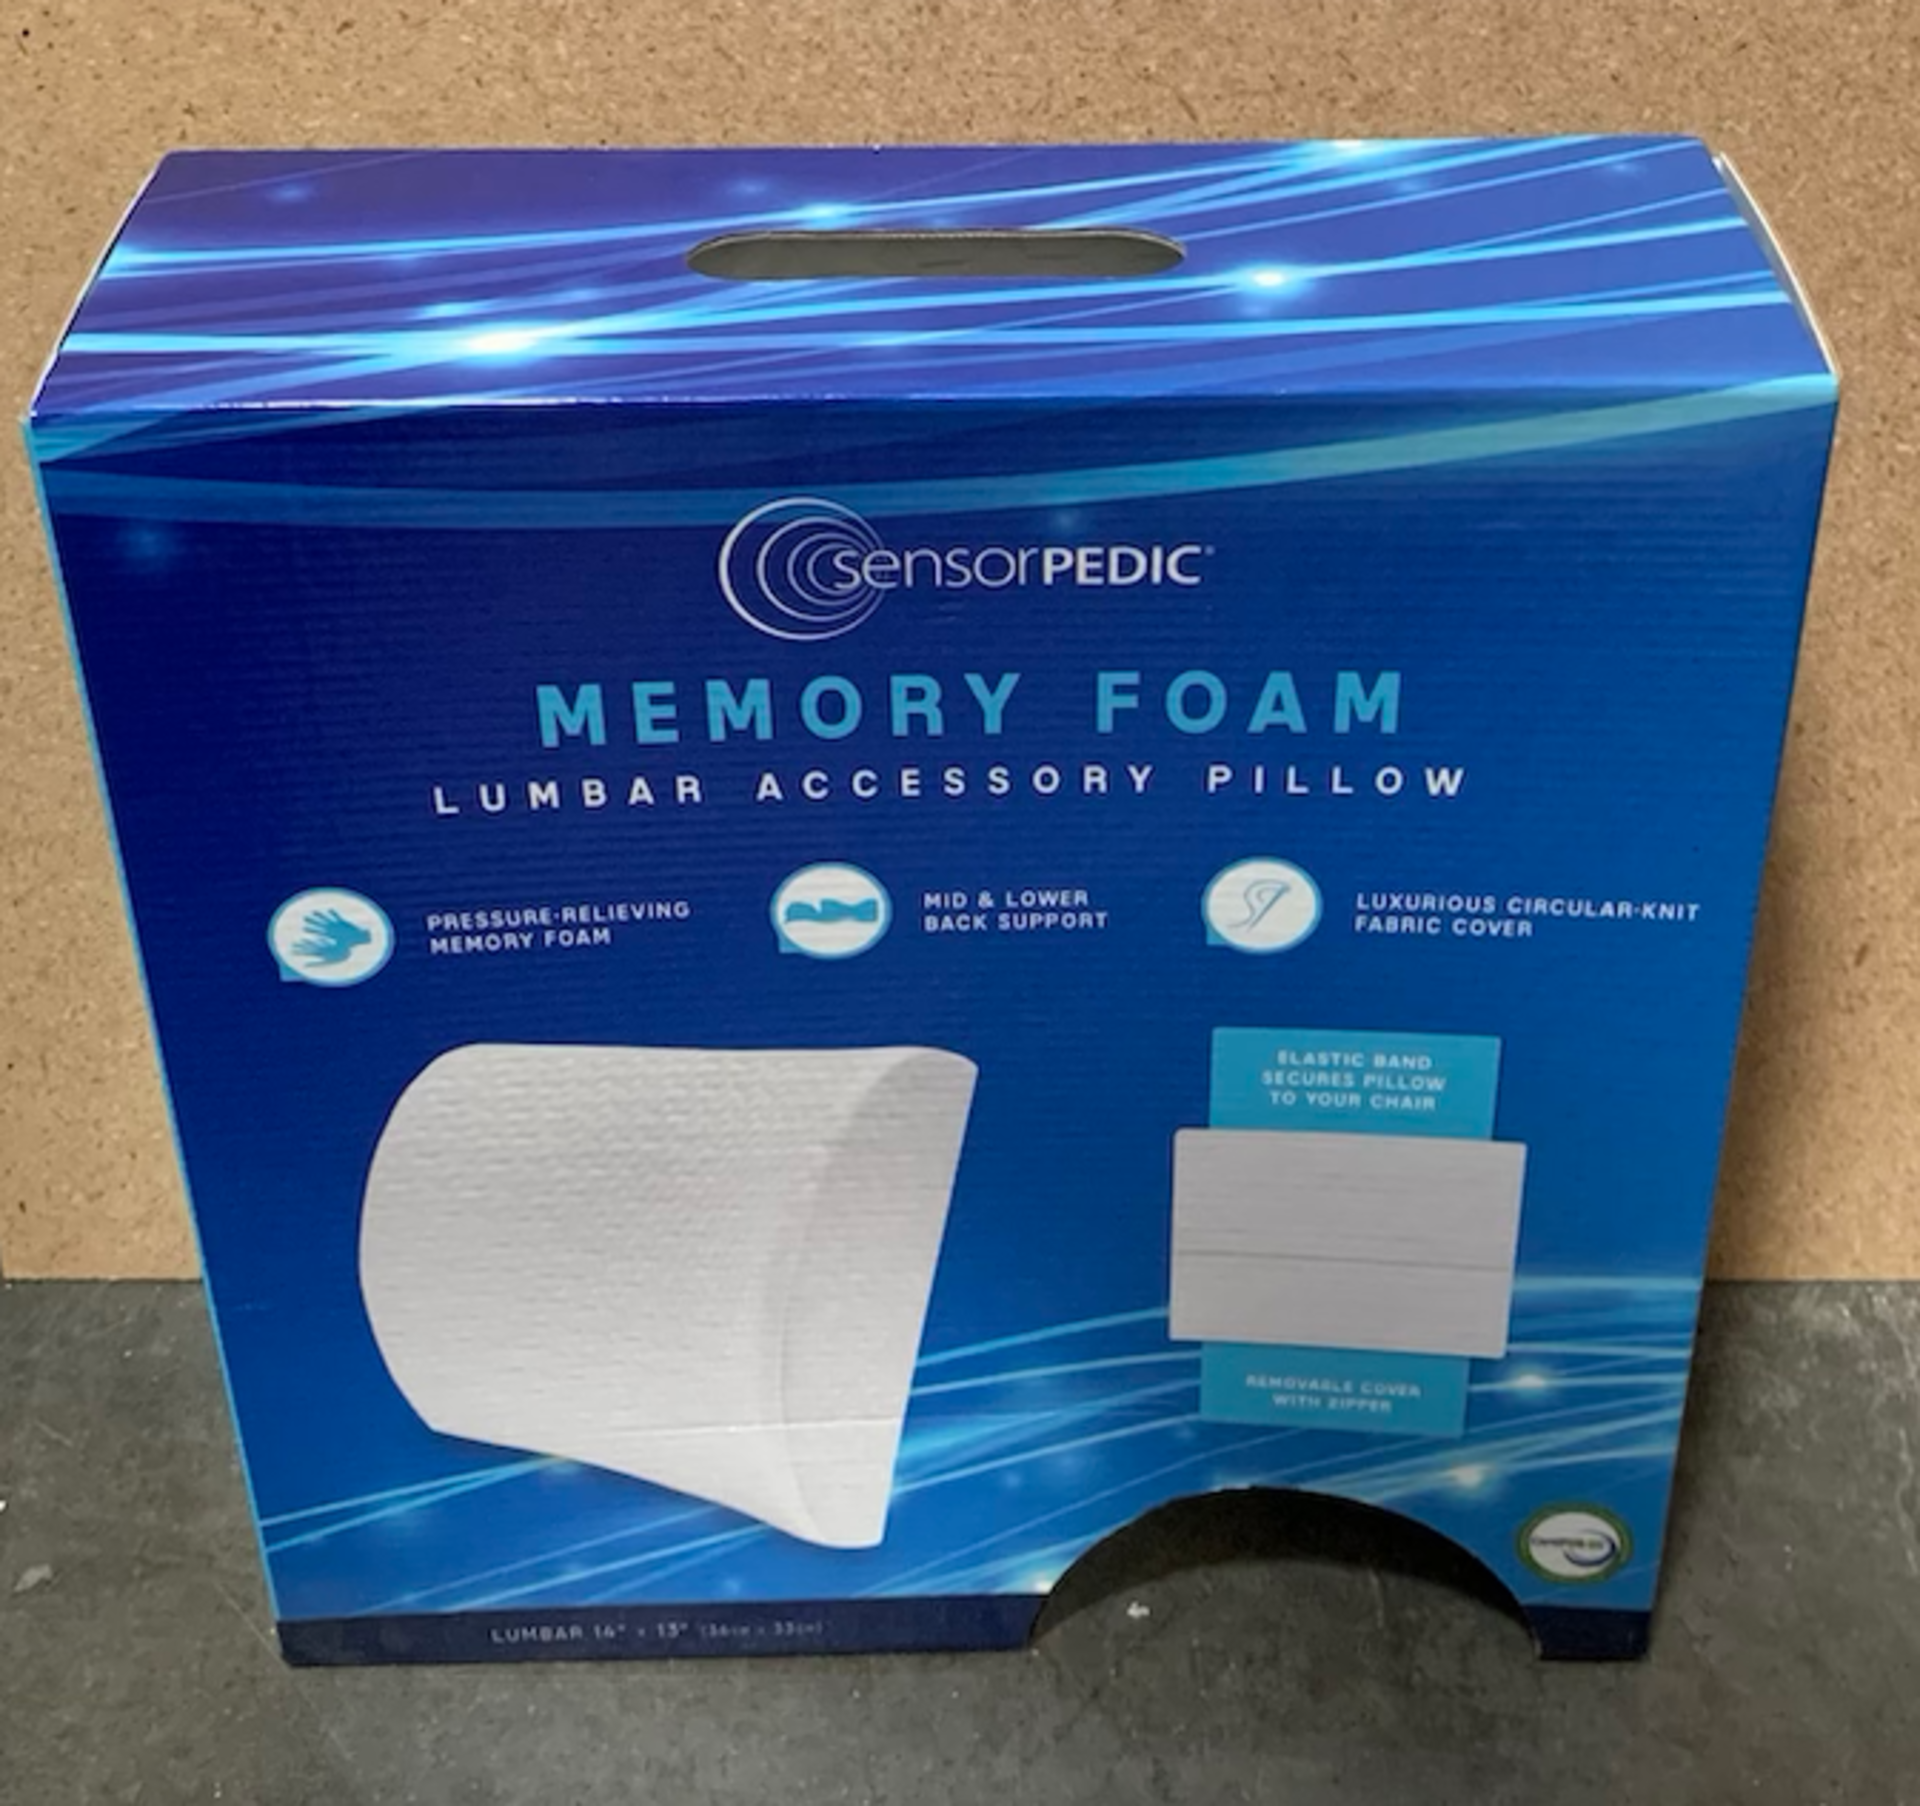 3 Memory Foam Pillows, including Conair Sleeping Set, All in Box - Image 4 of 4